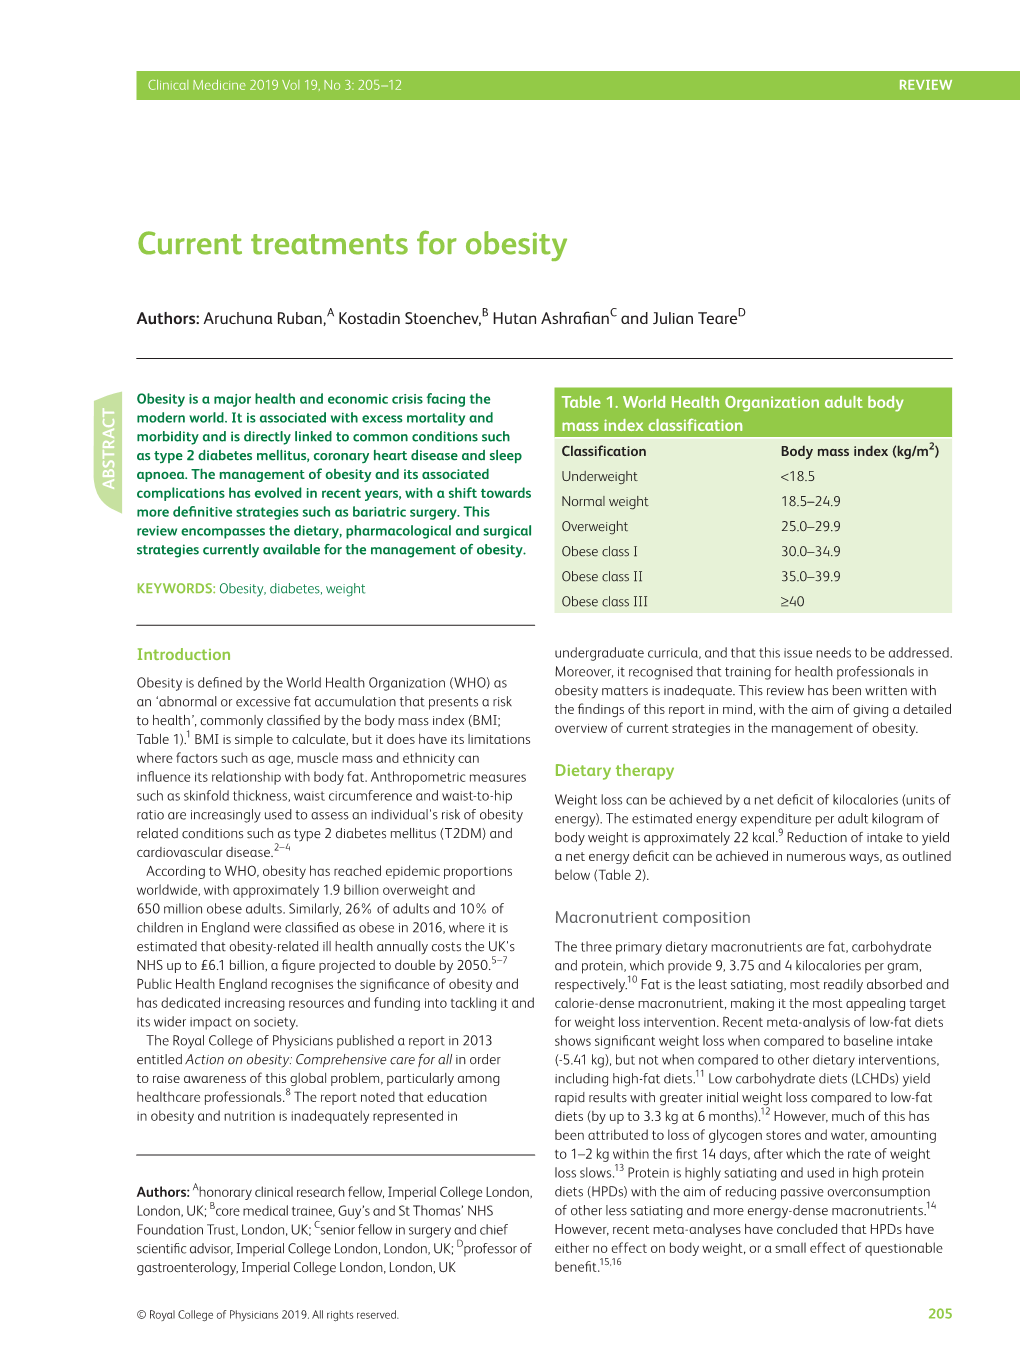 Current Treatments for Obesity